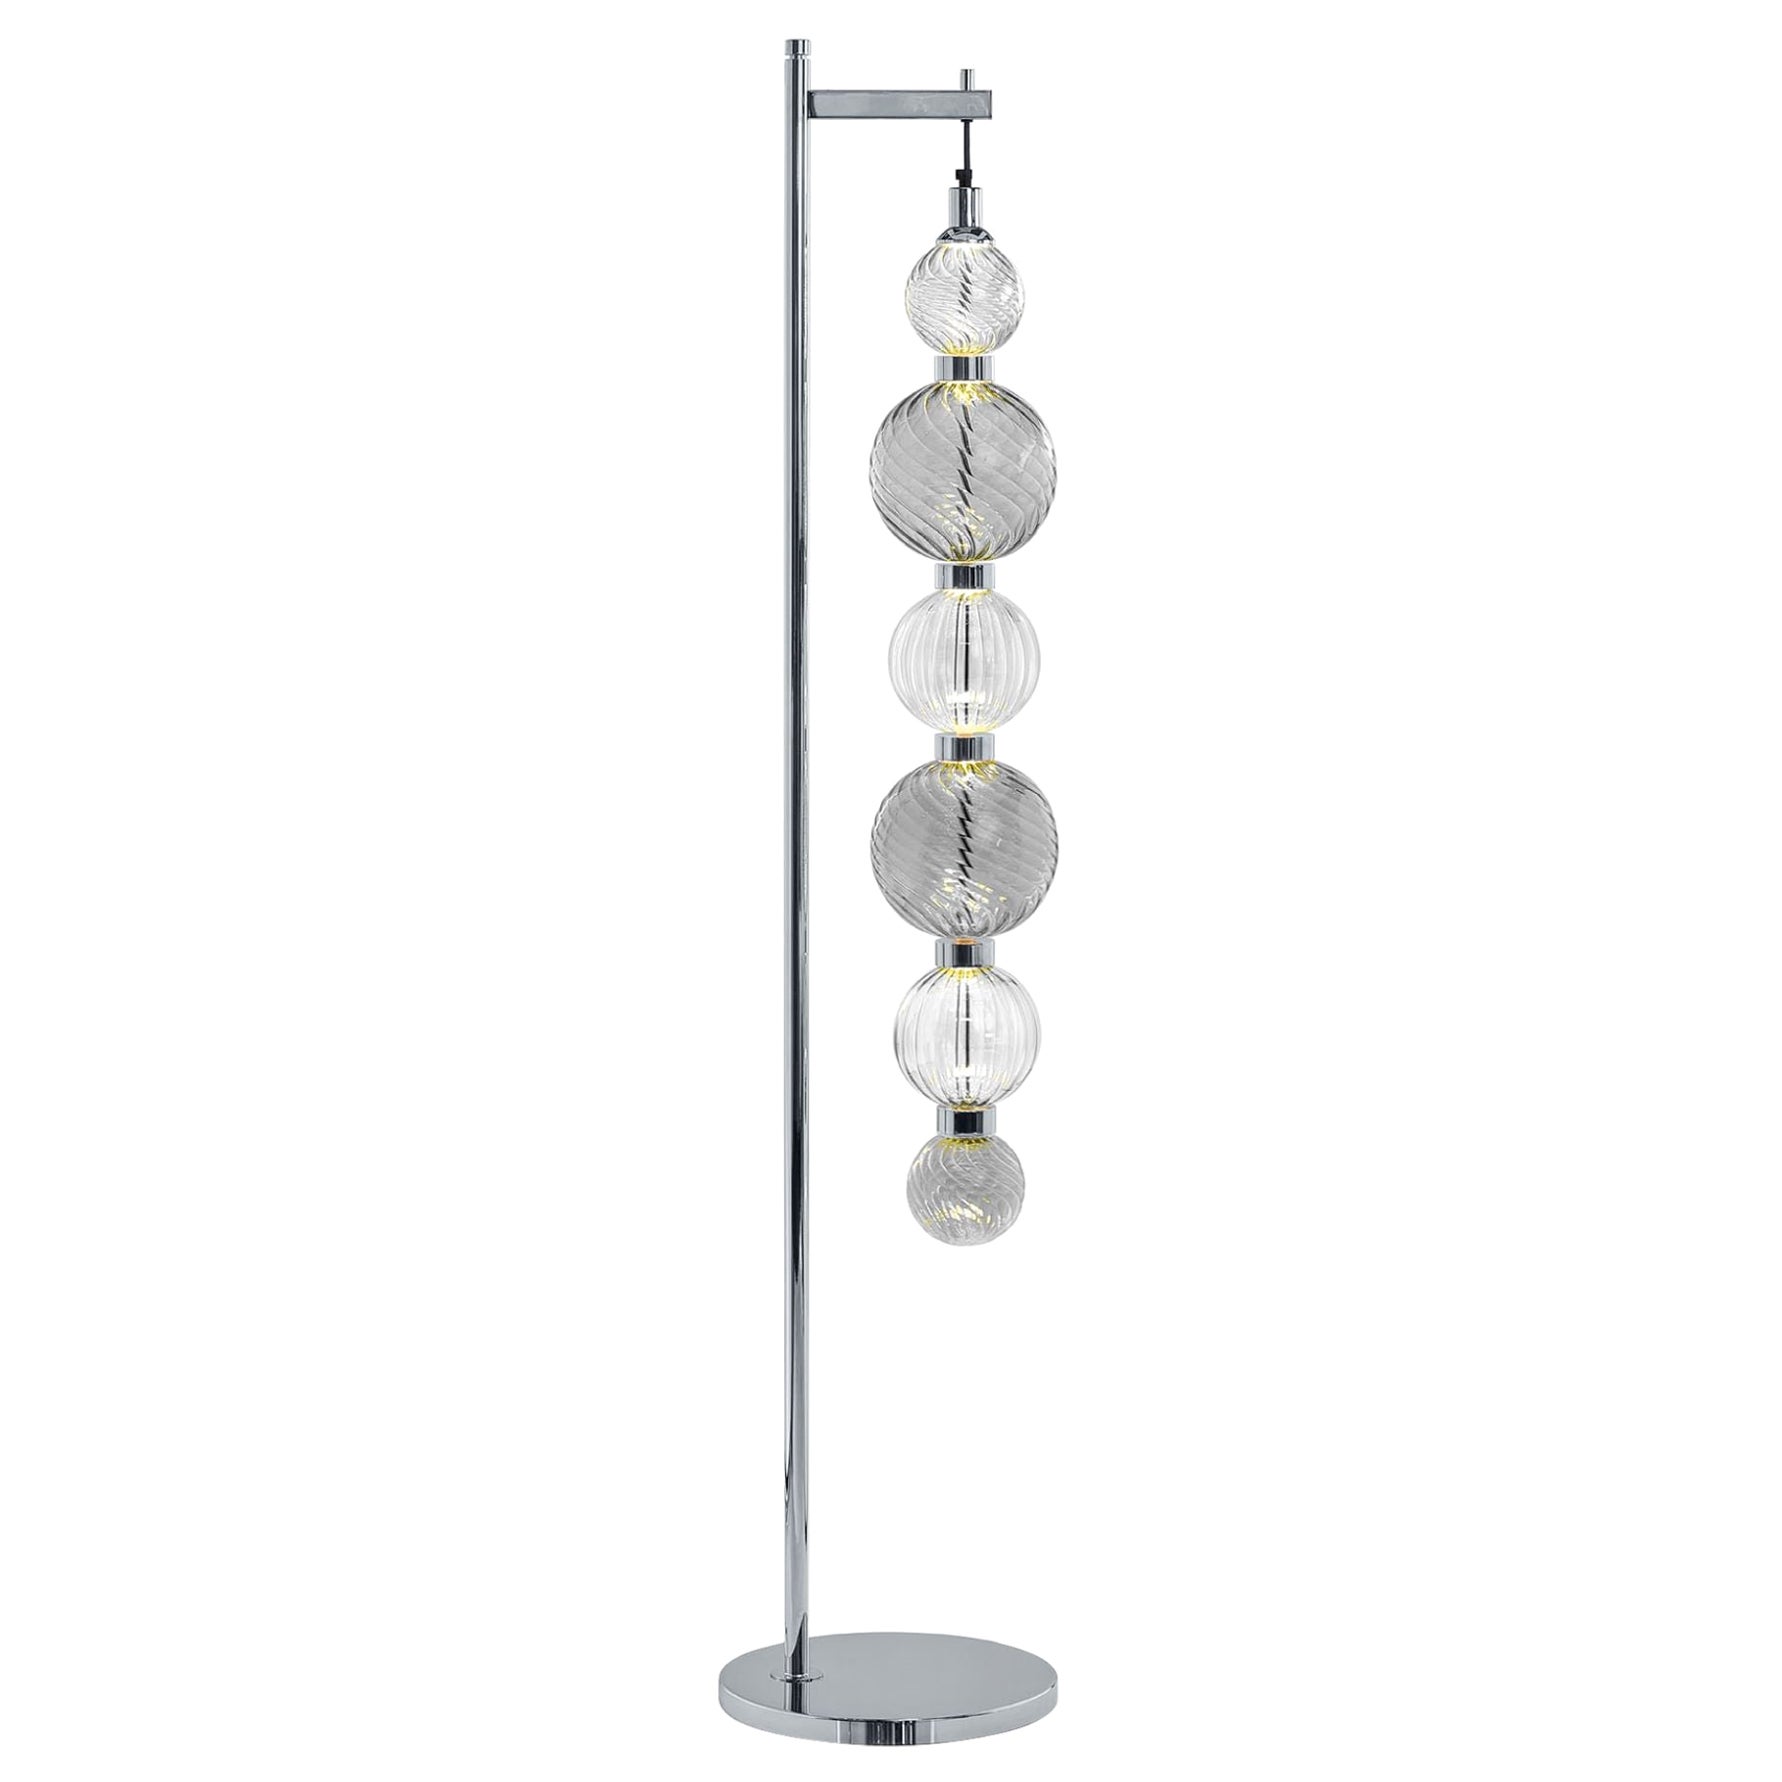 Floor Lamp Polished Champagne or Chrome Finish Murano Glass Spheres Customizable